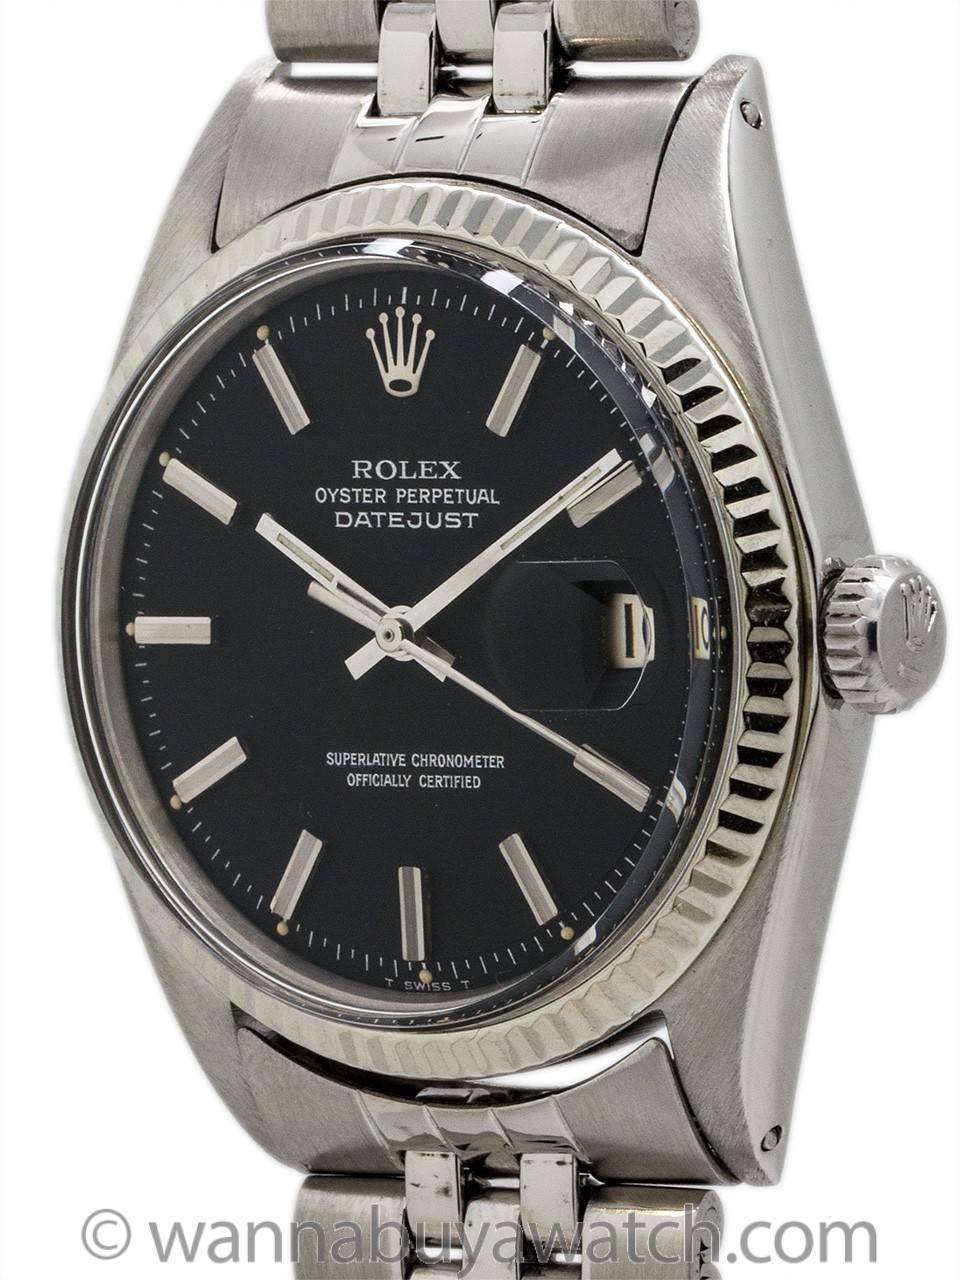 Rolex Datejust ref 1601 serial # 1.9 million circa 1968. Makes a wonderful commemorative gift for 1968 birth year and wedding anniversaries. Featuring 36mm diameter Oyster case with 14K white gold fluted bezel, acrylic crystal, and original matte